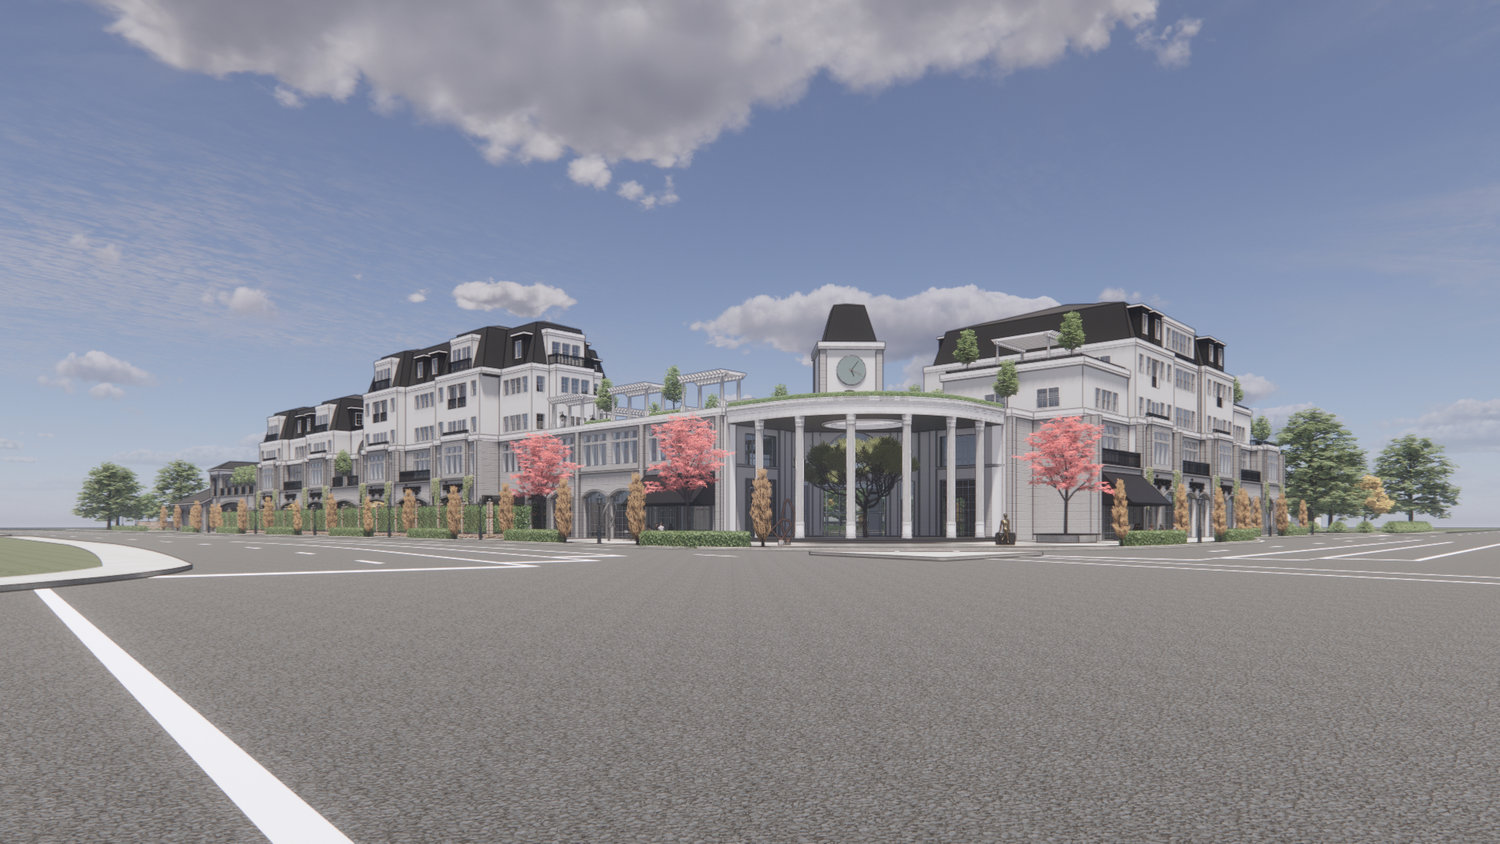 Springfield’s second-busiest corner, at Sunshine Street and National Avenue, is the site of a proposed mixed-use development for which developers BK&M seek a rezoning to commercial from single-family residential.